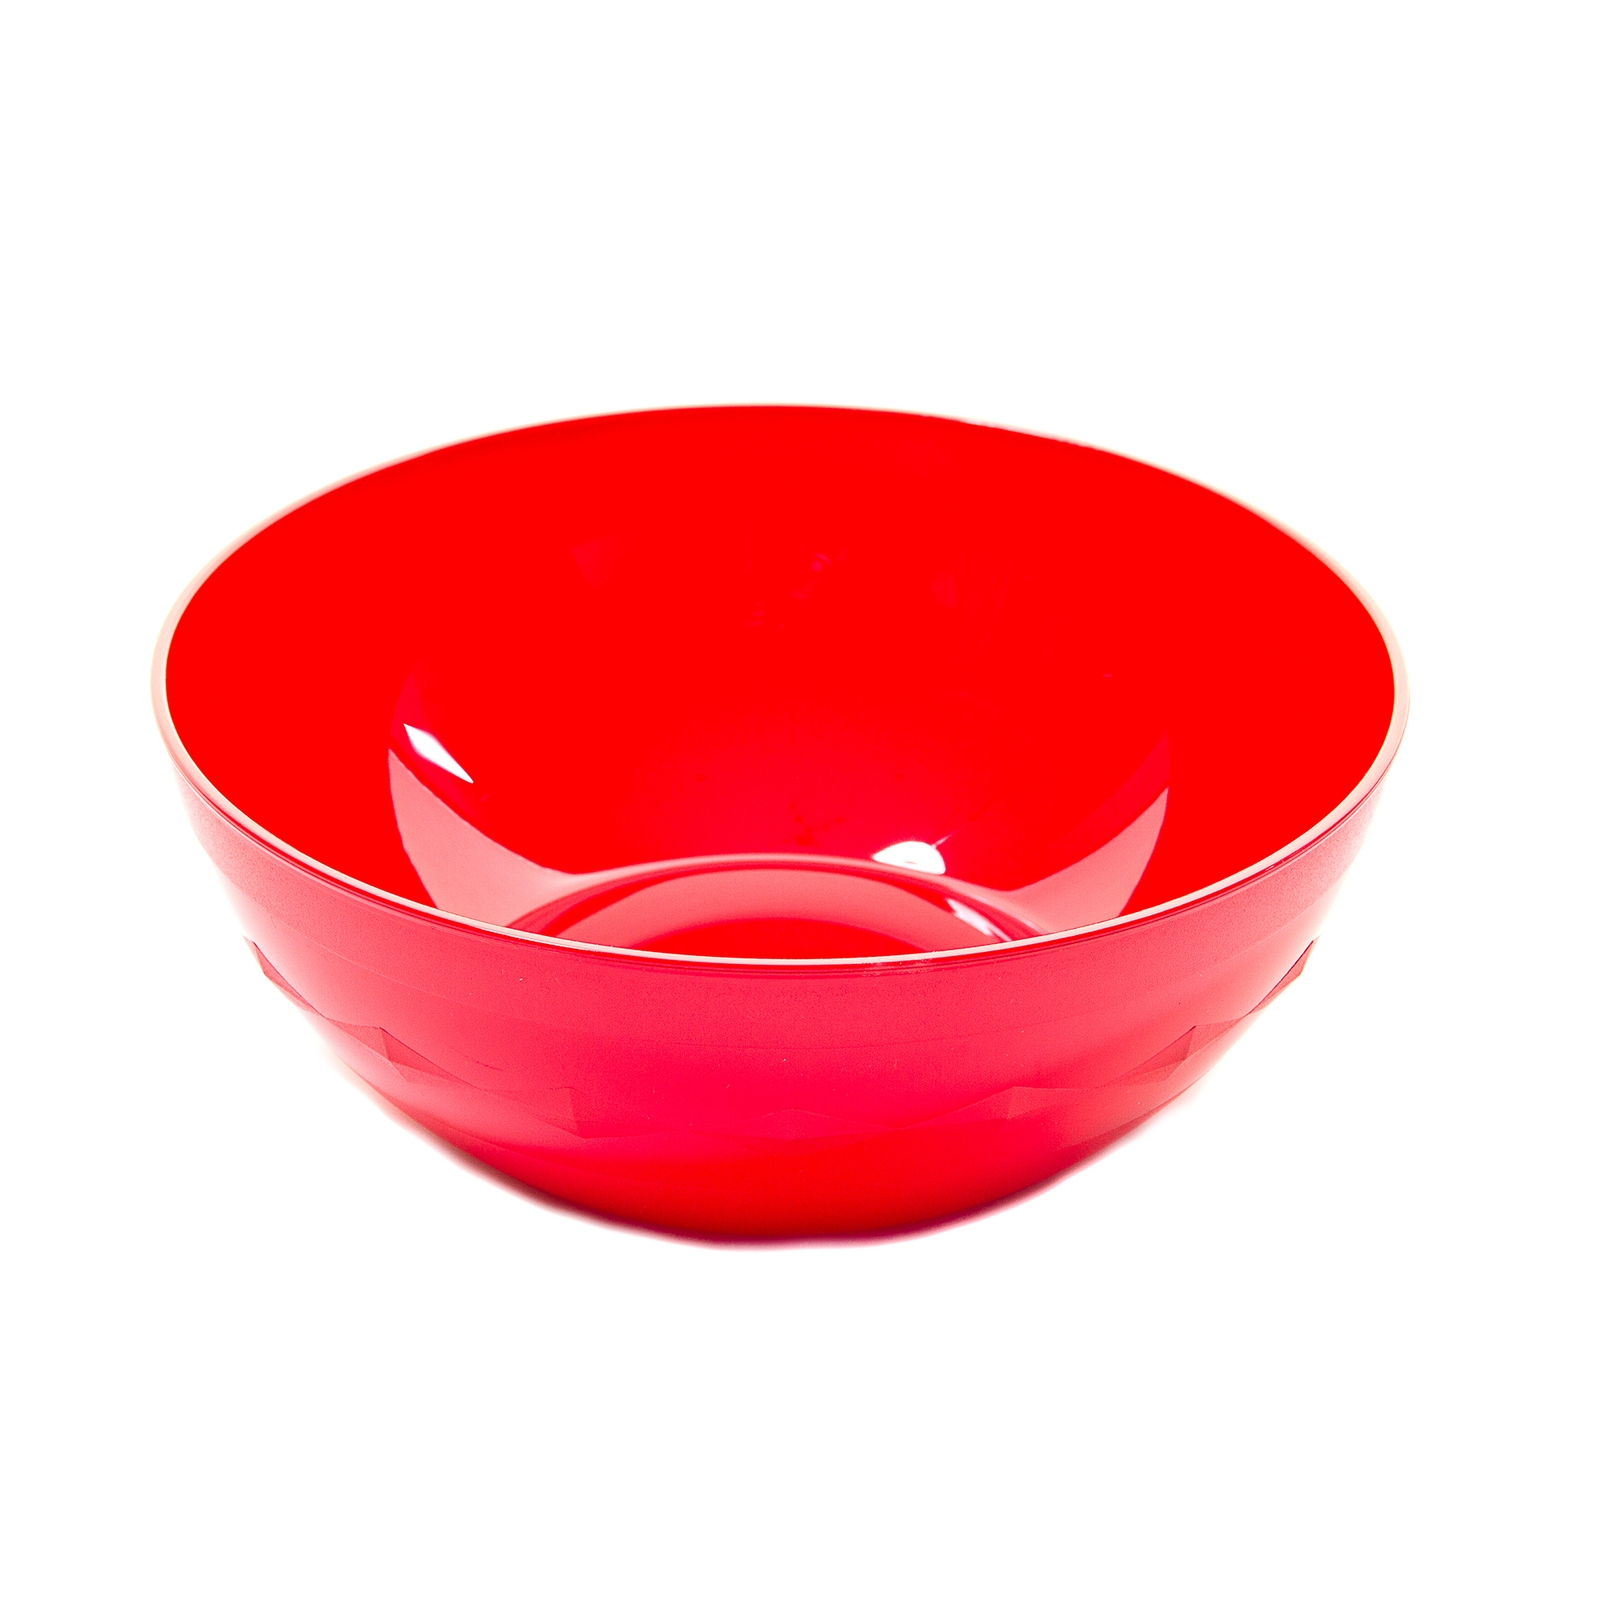 Harfield Serving Bowl - Red 